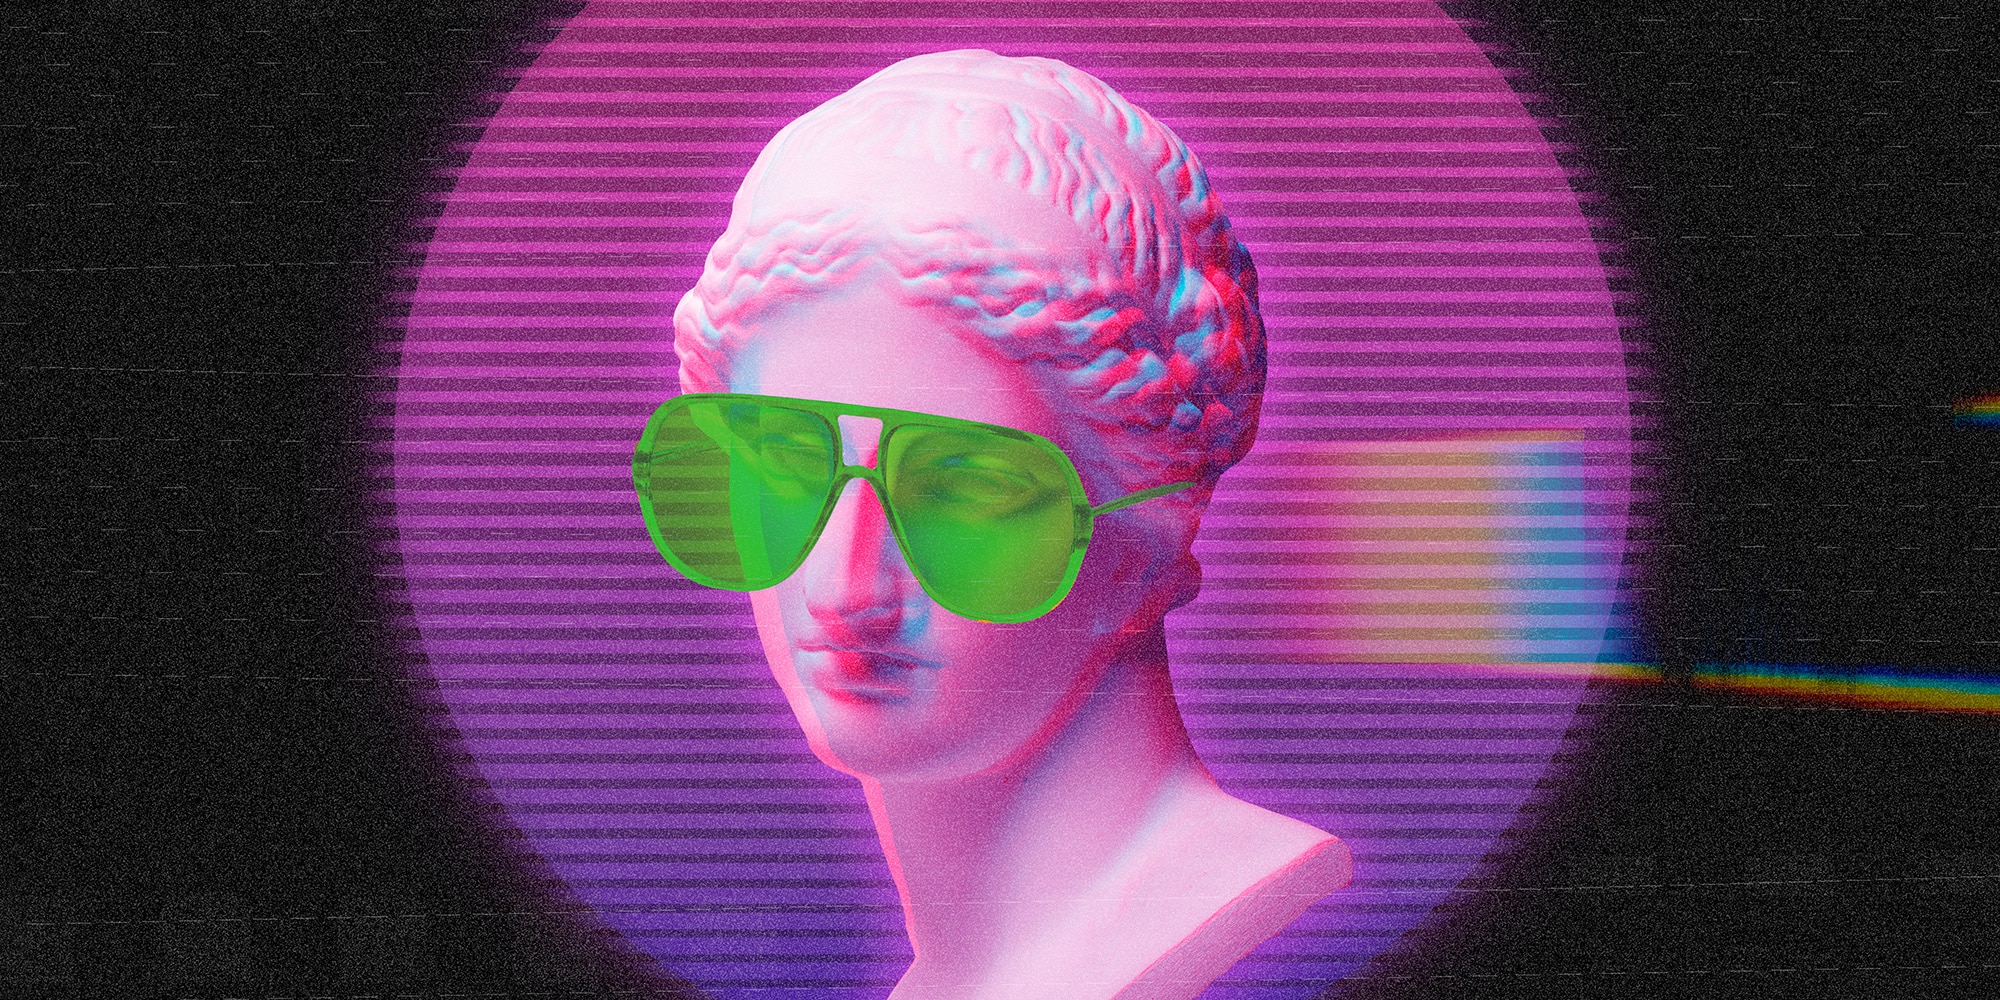 statue head with green glasses on hot pink circle